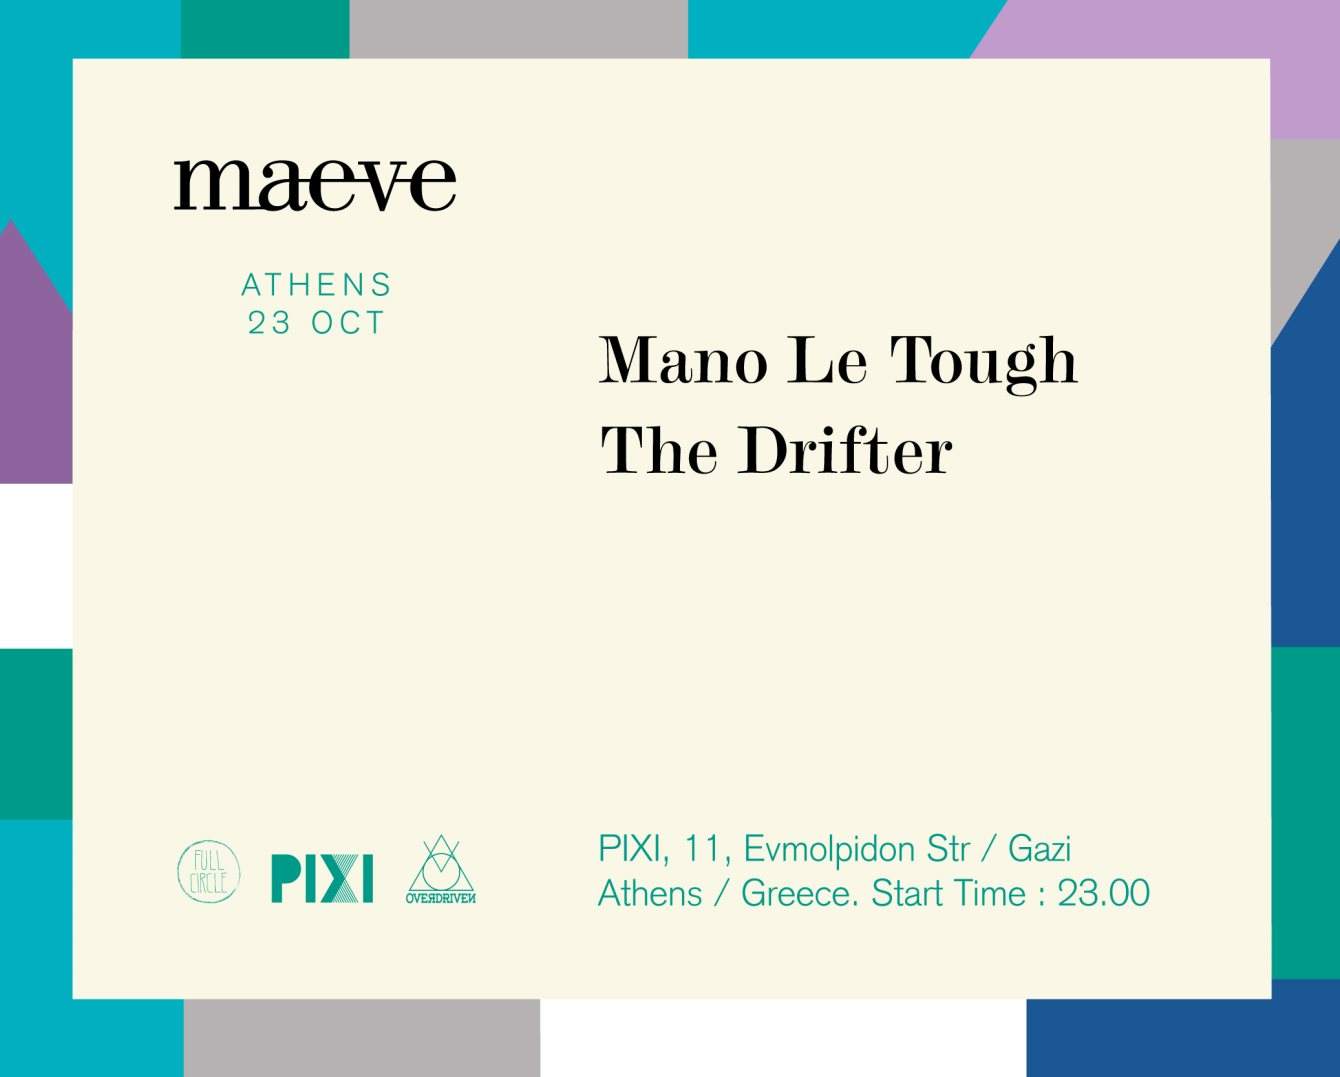 Mano LE Tough The Drifter / Maeve Athens by Pixi, Overdriven, Full Circle - Página frontal